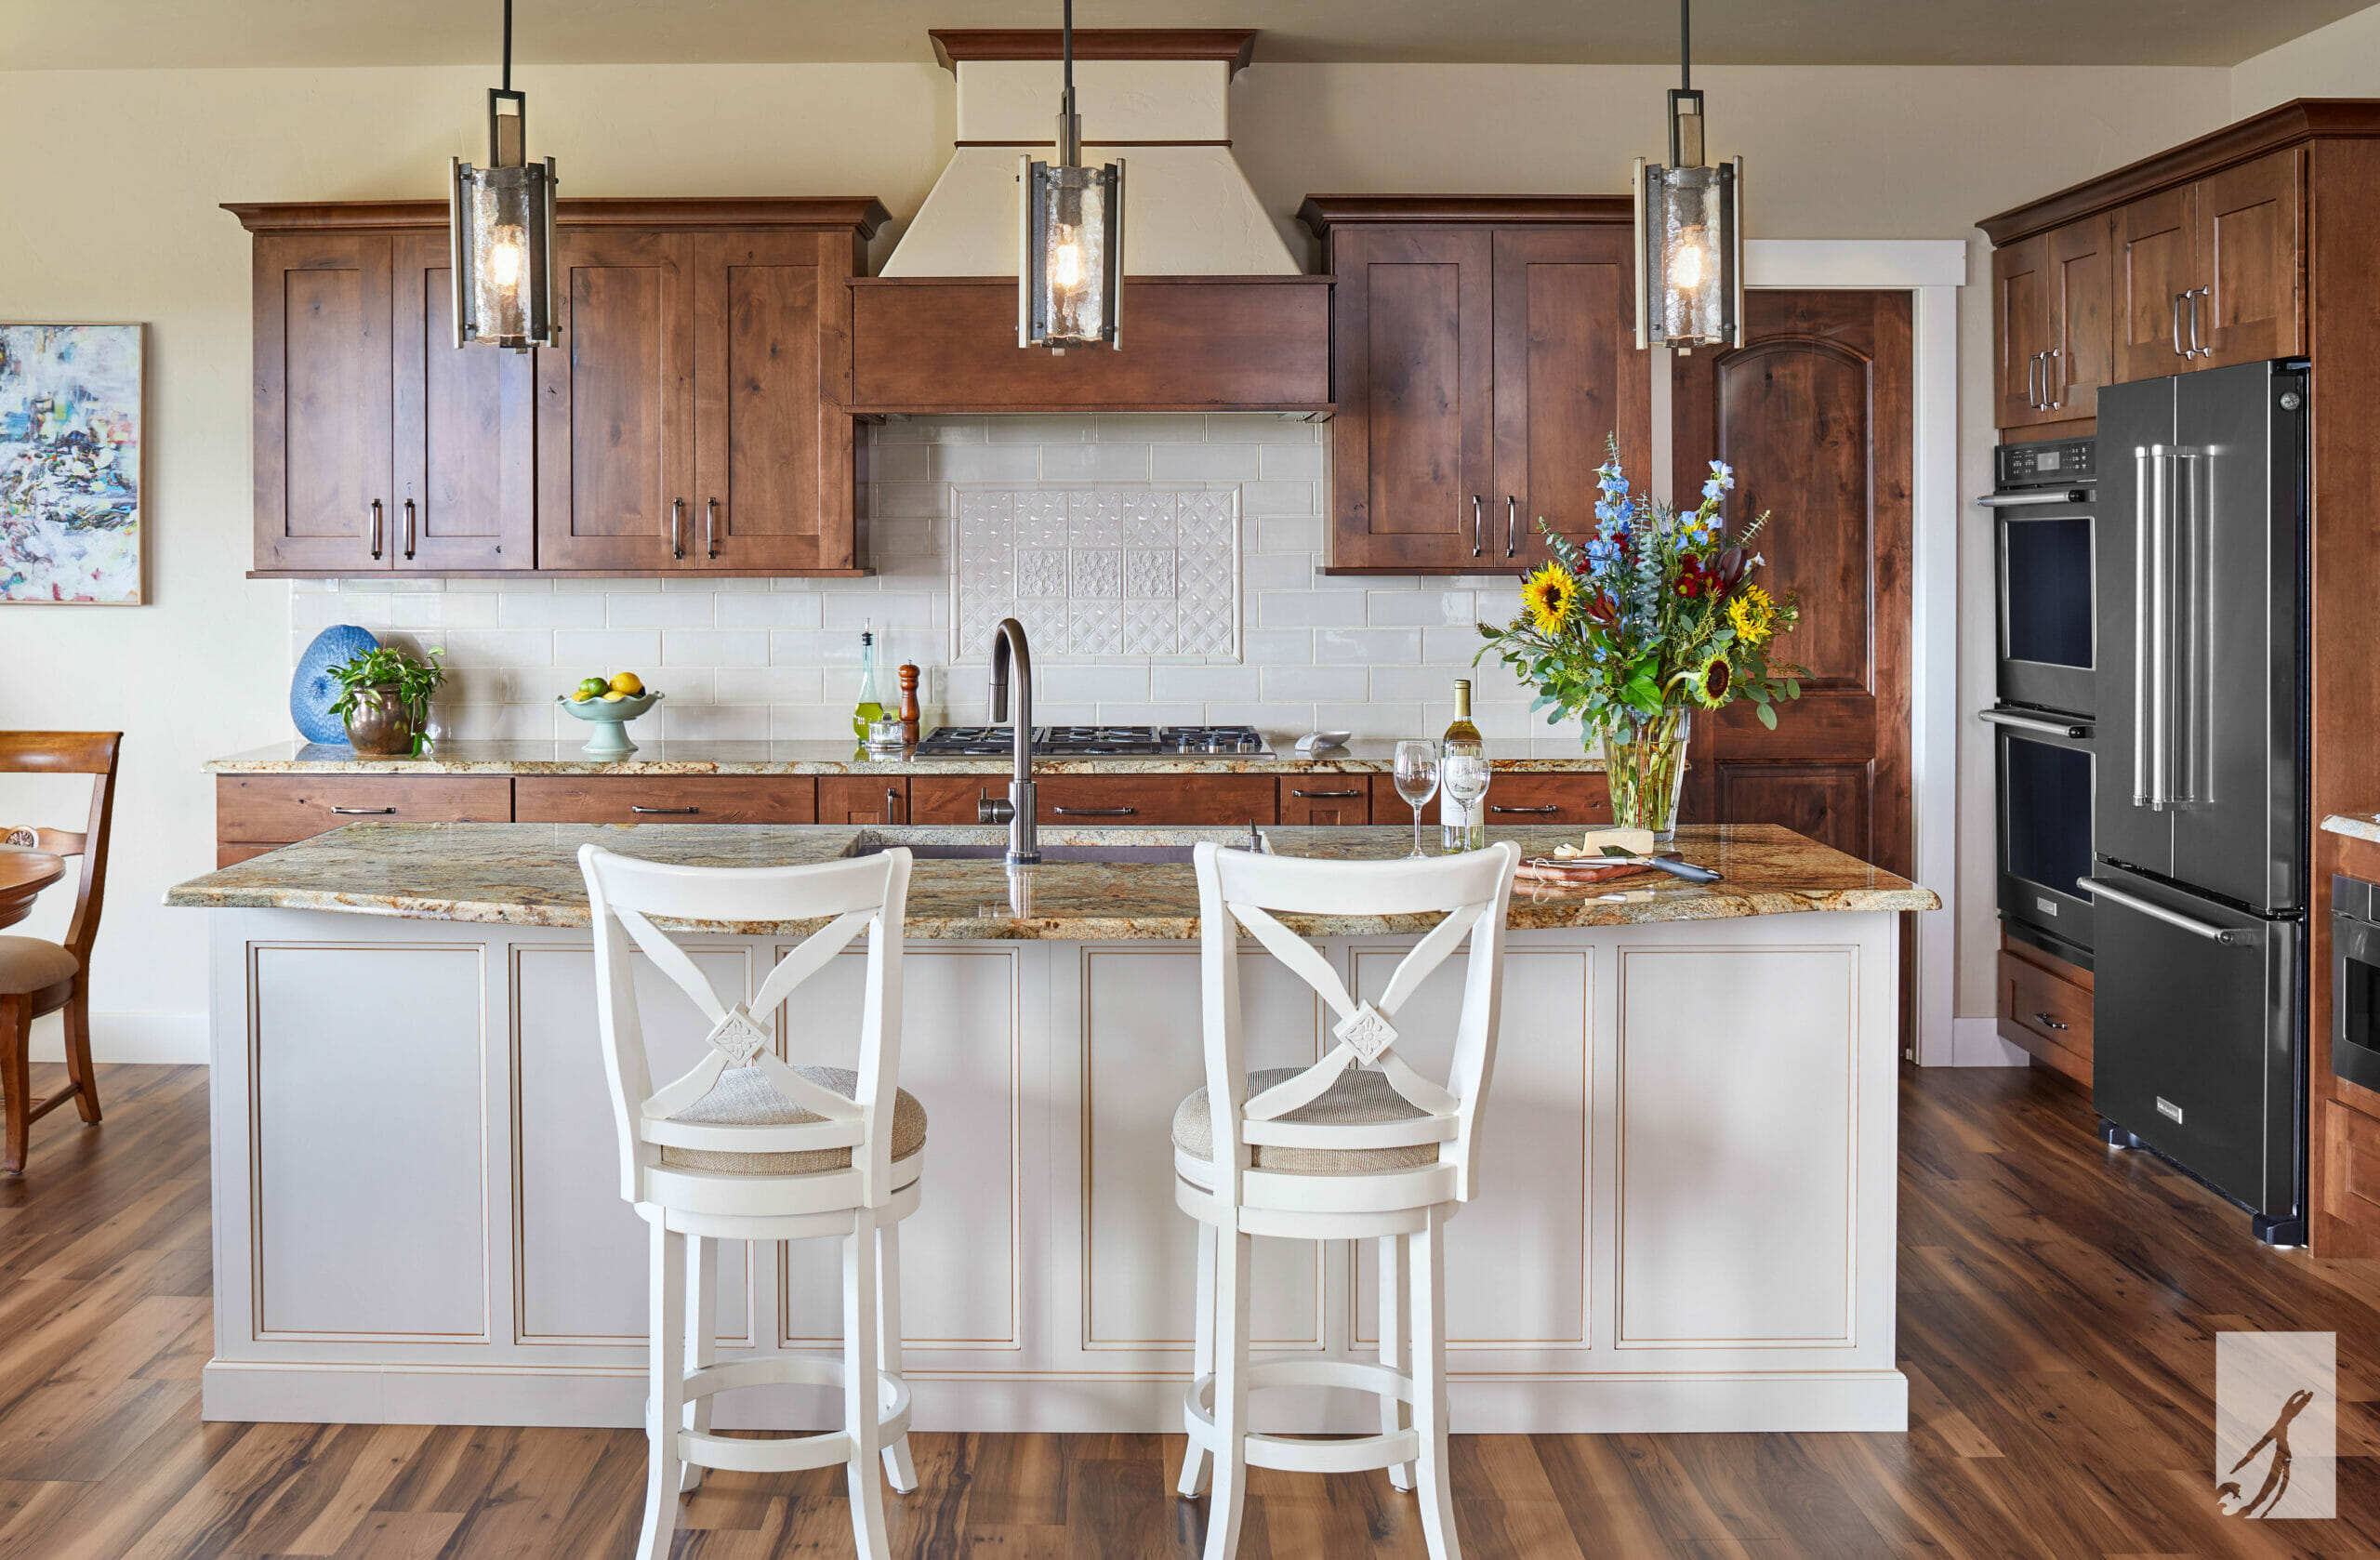 Wooden accent in kitchen interior design Colorado Springs by Katherine and Courtney Springs